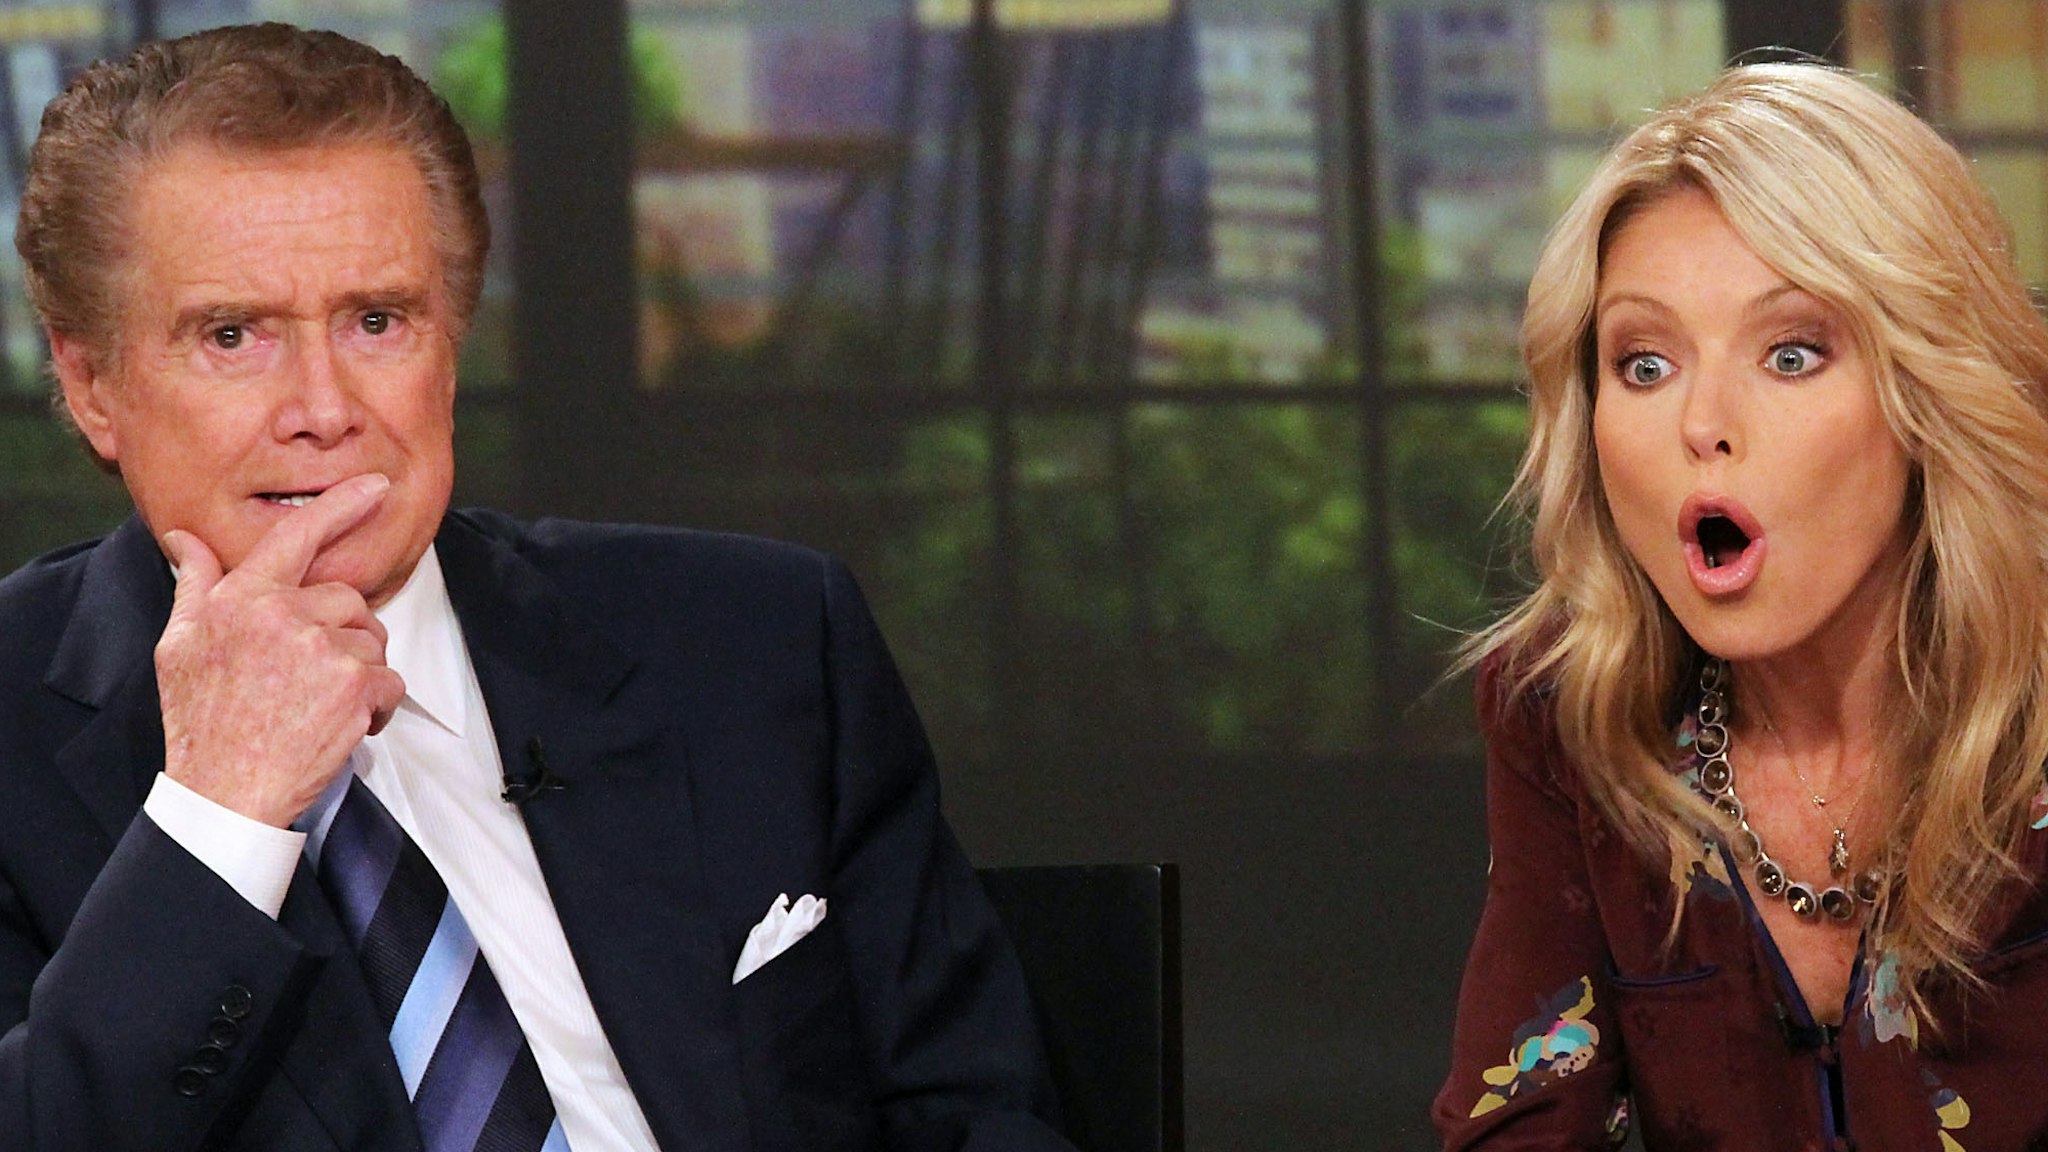 Regis Philbin and Kelly Ripa attend a press conference on Regis's departure from "LIVE! with Regis and Kelly" at ABC Studios on November 17, 2011 in New York City.